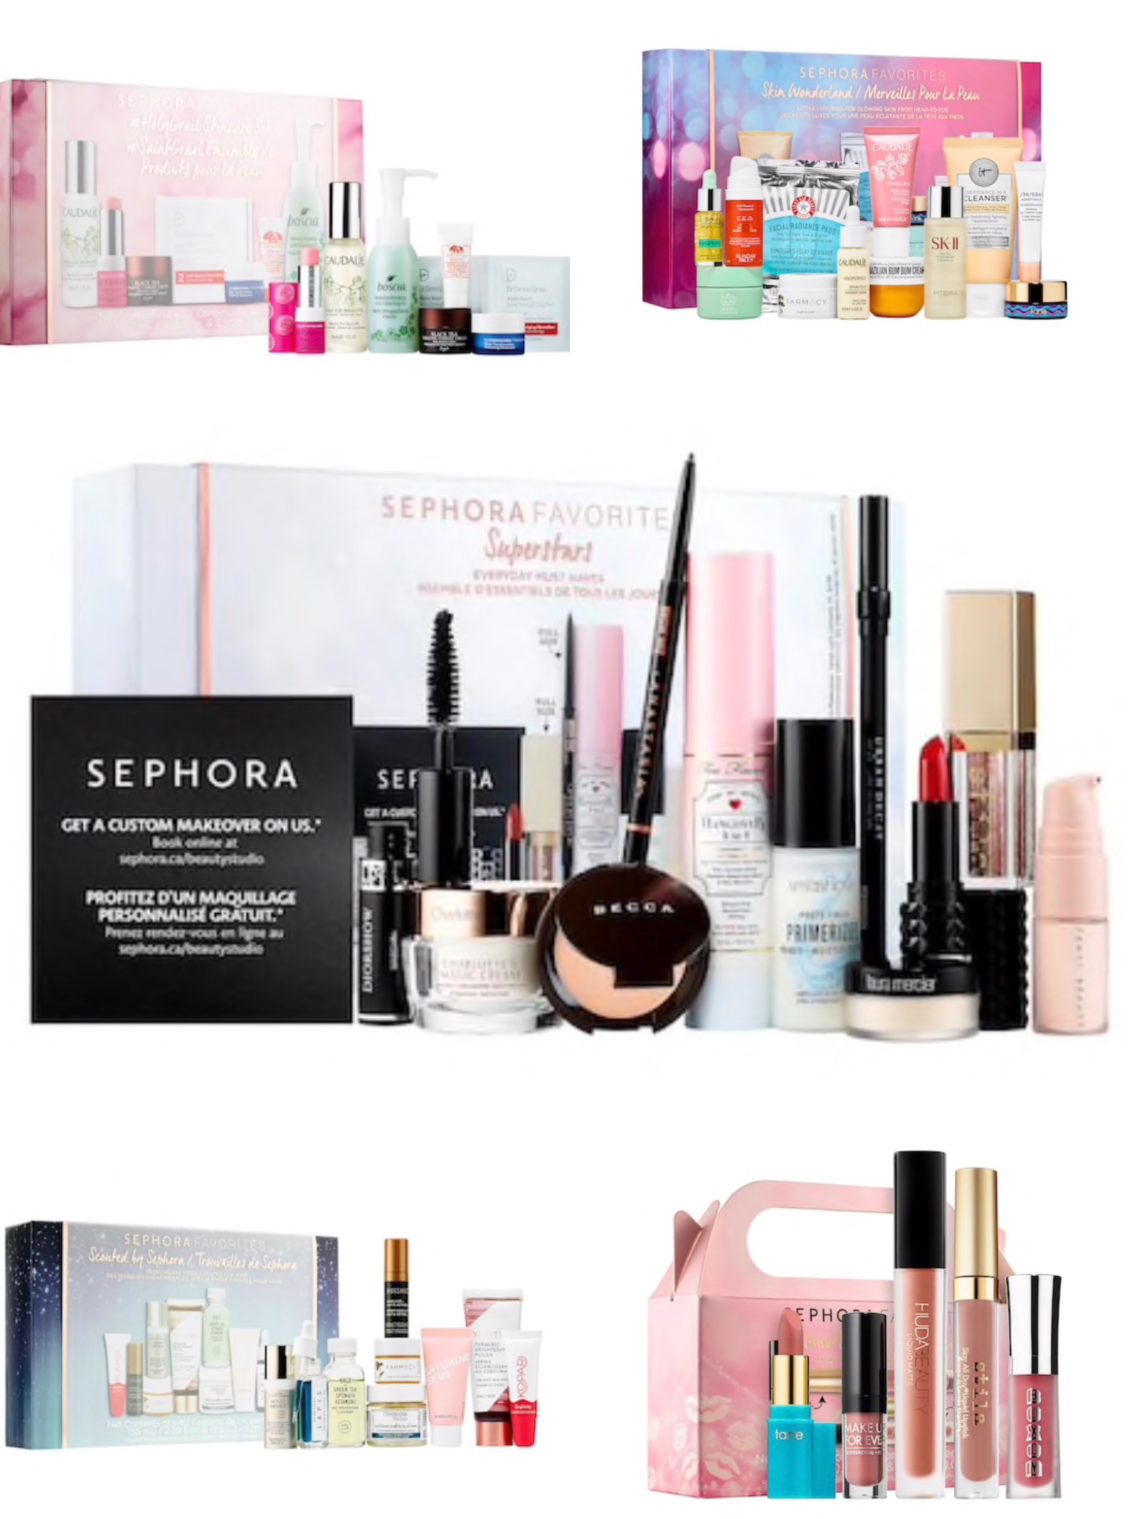 alt="Five Sephora Favorites Set You Don't Want to Miss"